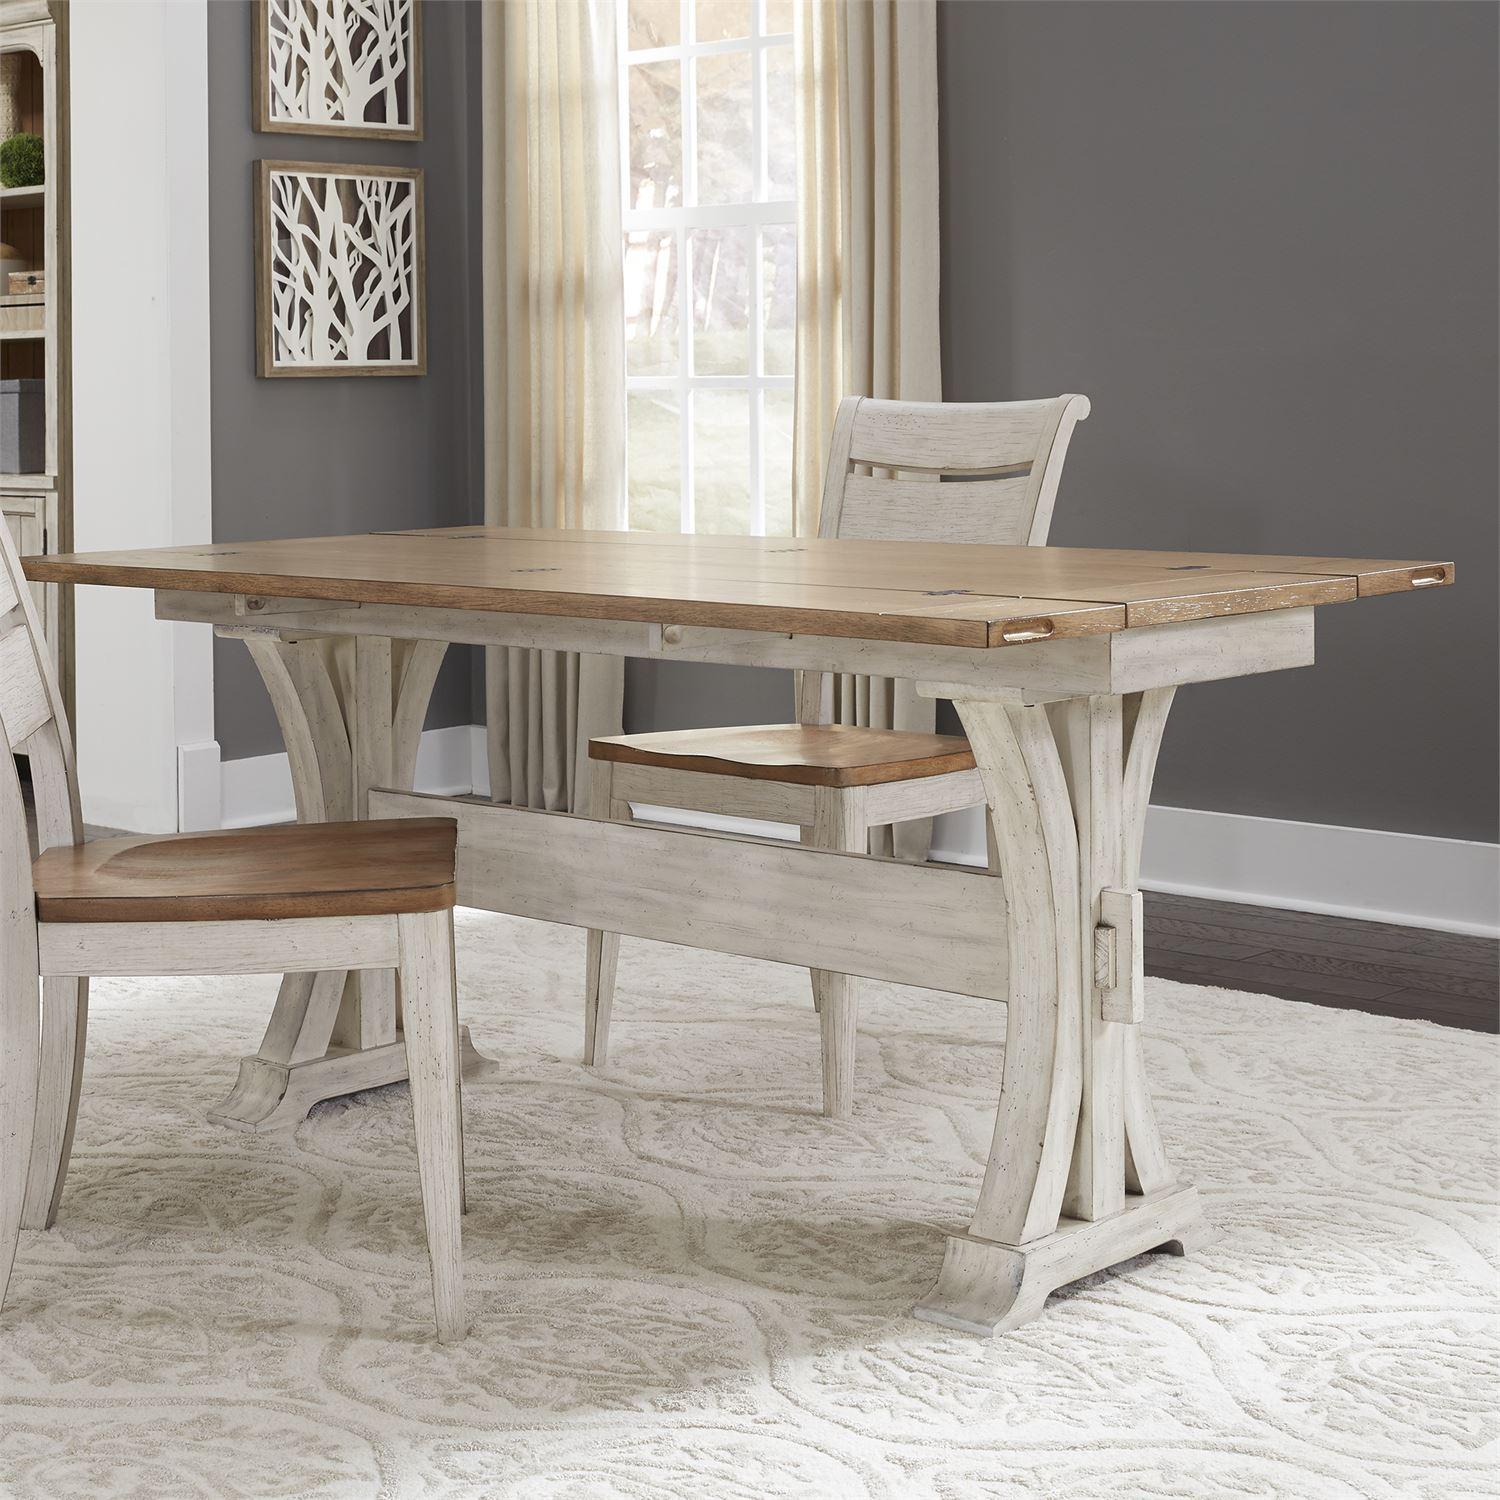 Farmhouse Dining Table Farmhouse Reimagined  (652-OT) Dining Table 652-OT1031 in White 